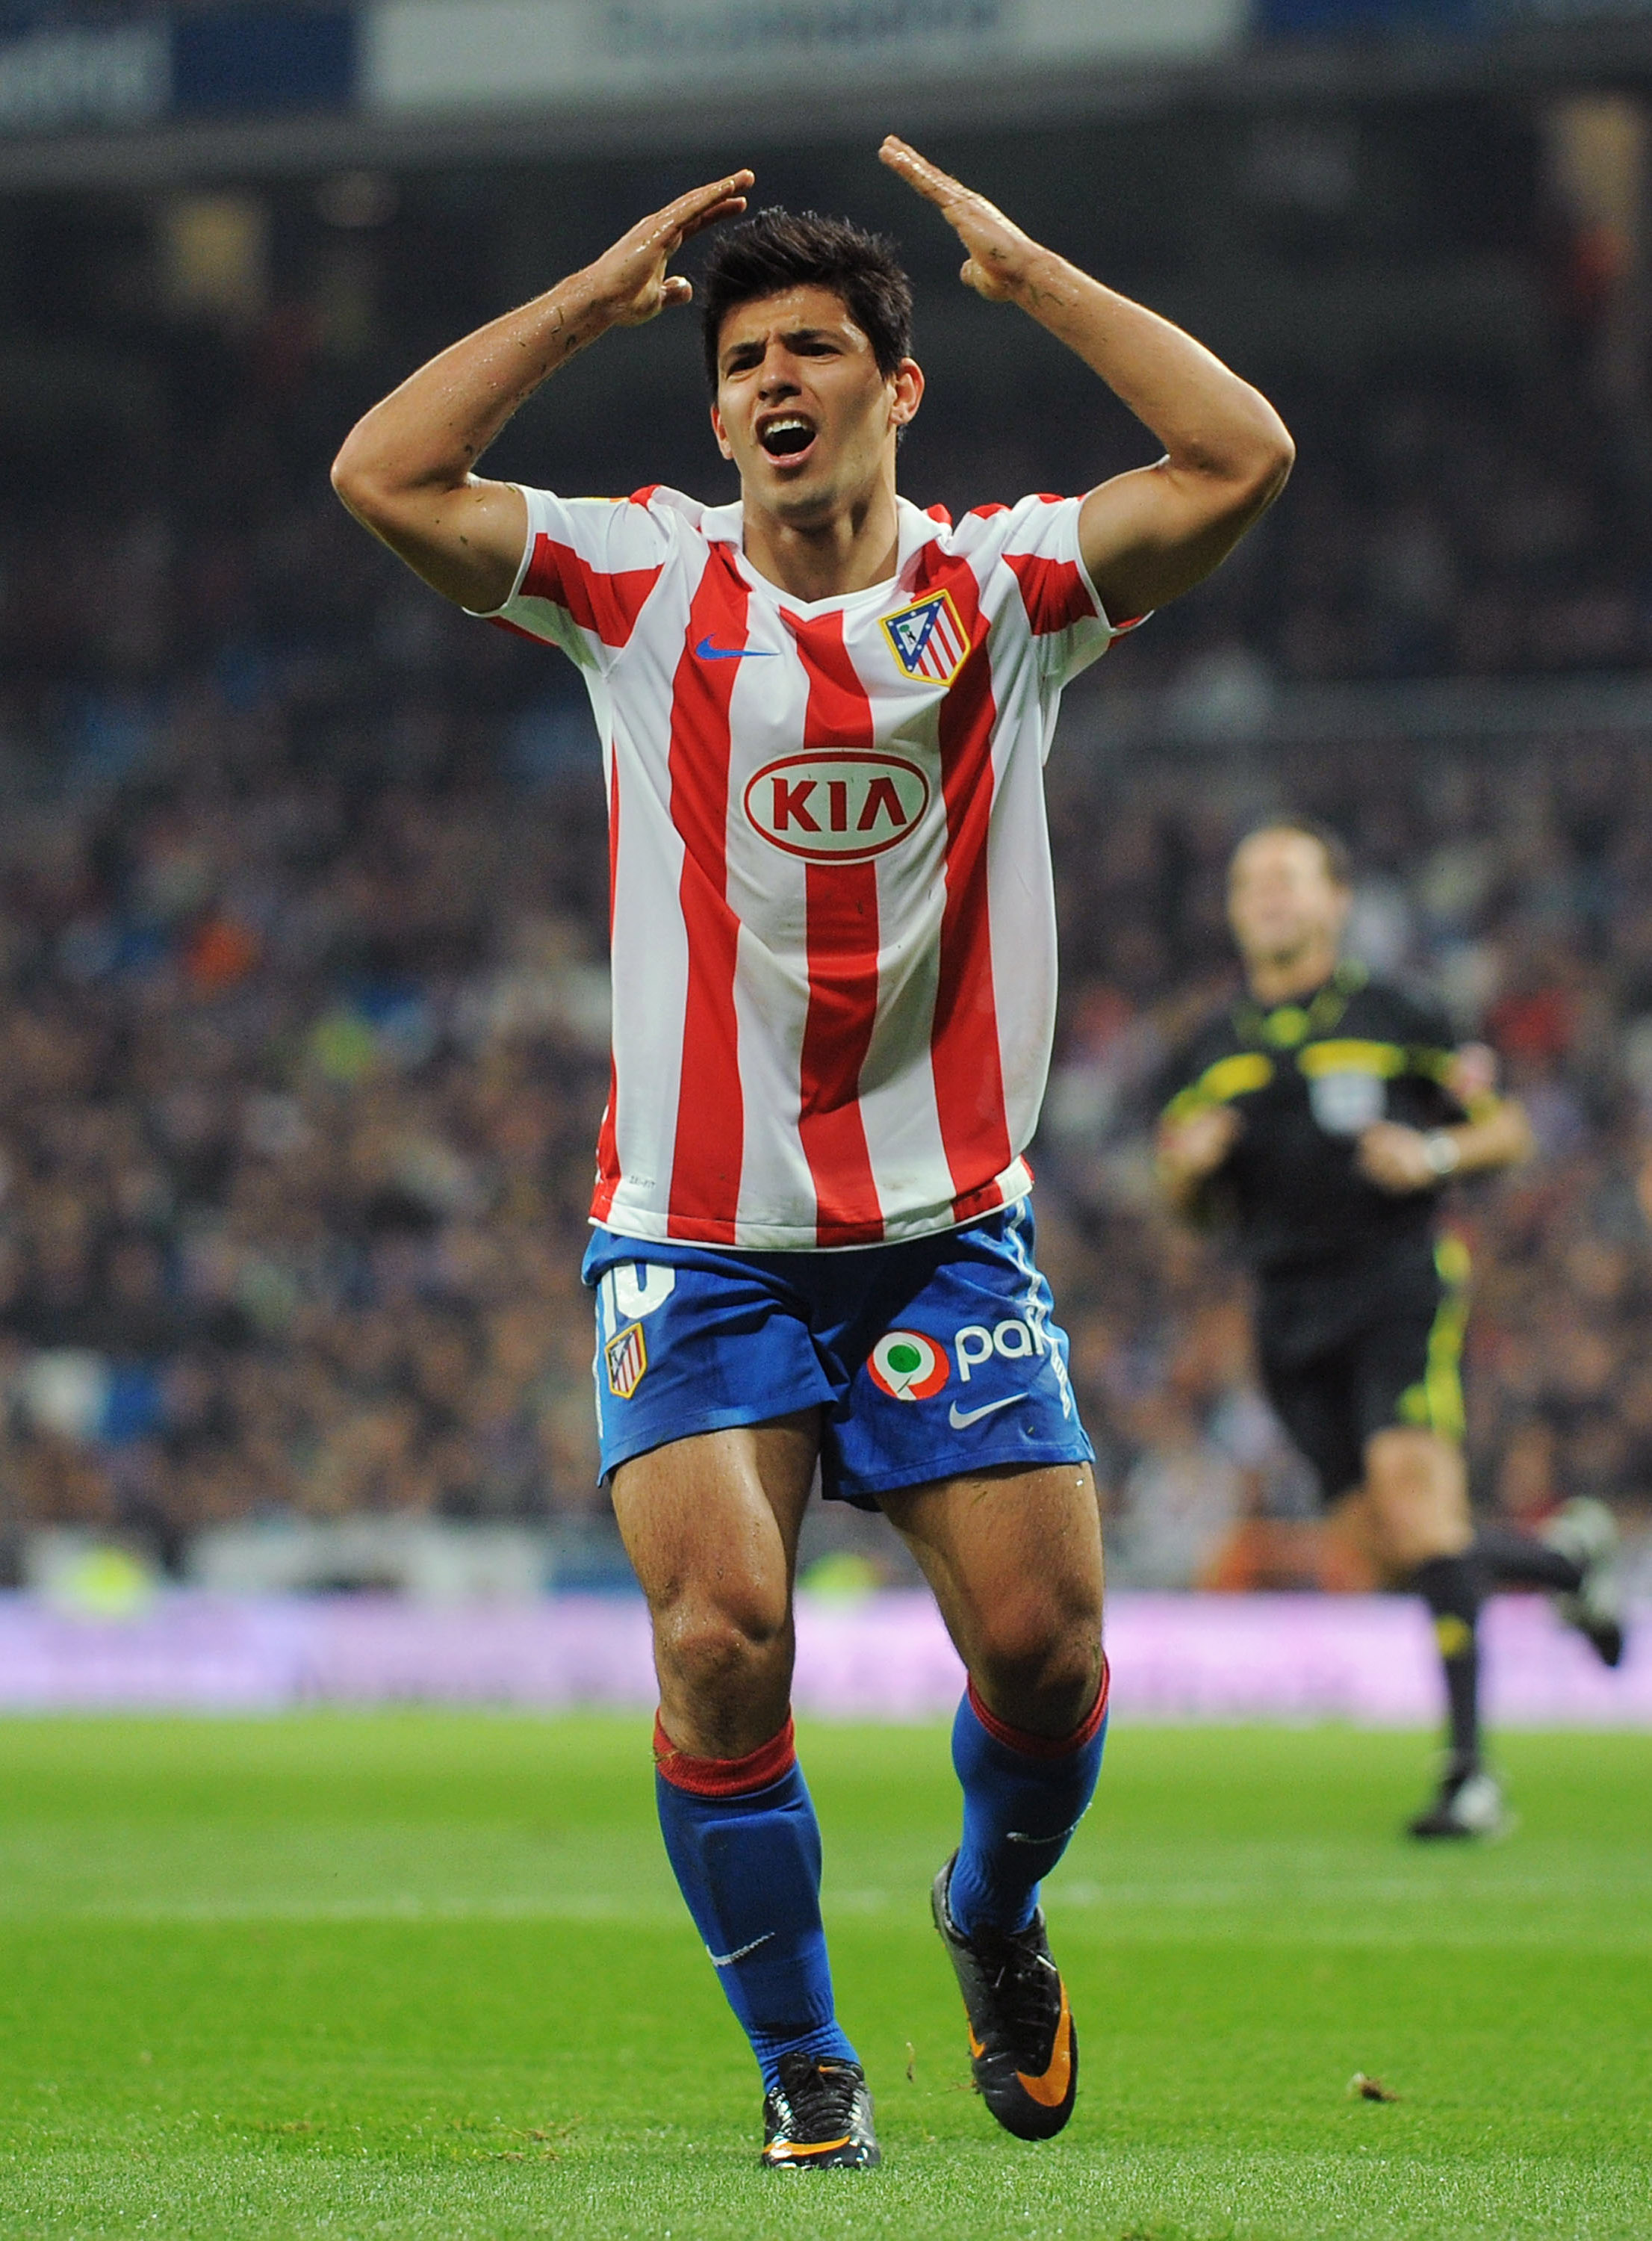 MADRID, SPAIN - JANUARY 13: Sergio Aguero of Atletico Madrid reacts during the Copa del Rey quarter final first leg match between Real Madrid and Atletico Madrid at Estadio Santiago Bernabeu on January 13, 2011 in Madrid, Spain.  (Photo by Denis Doyle/Get